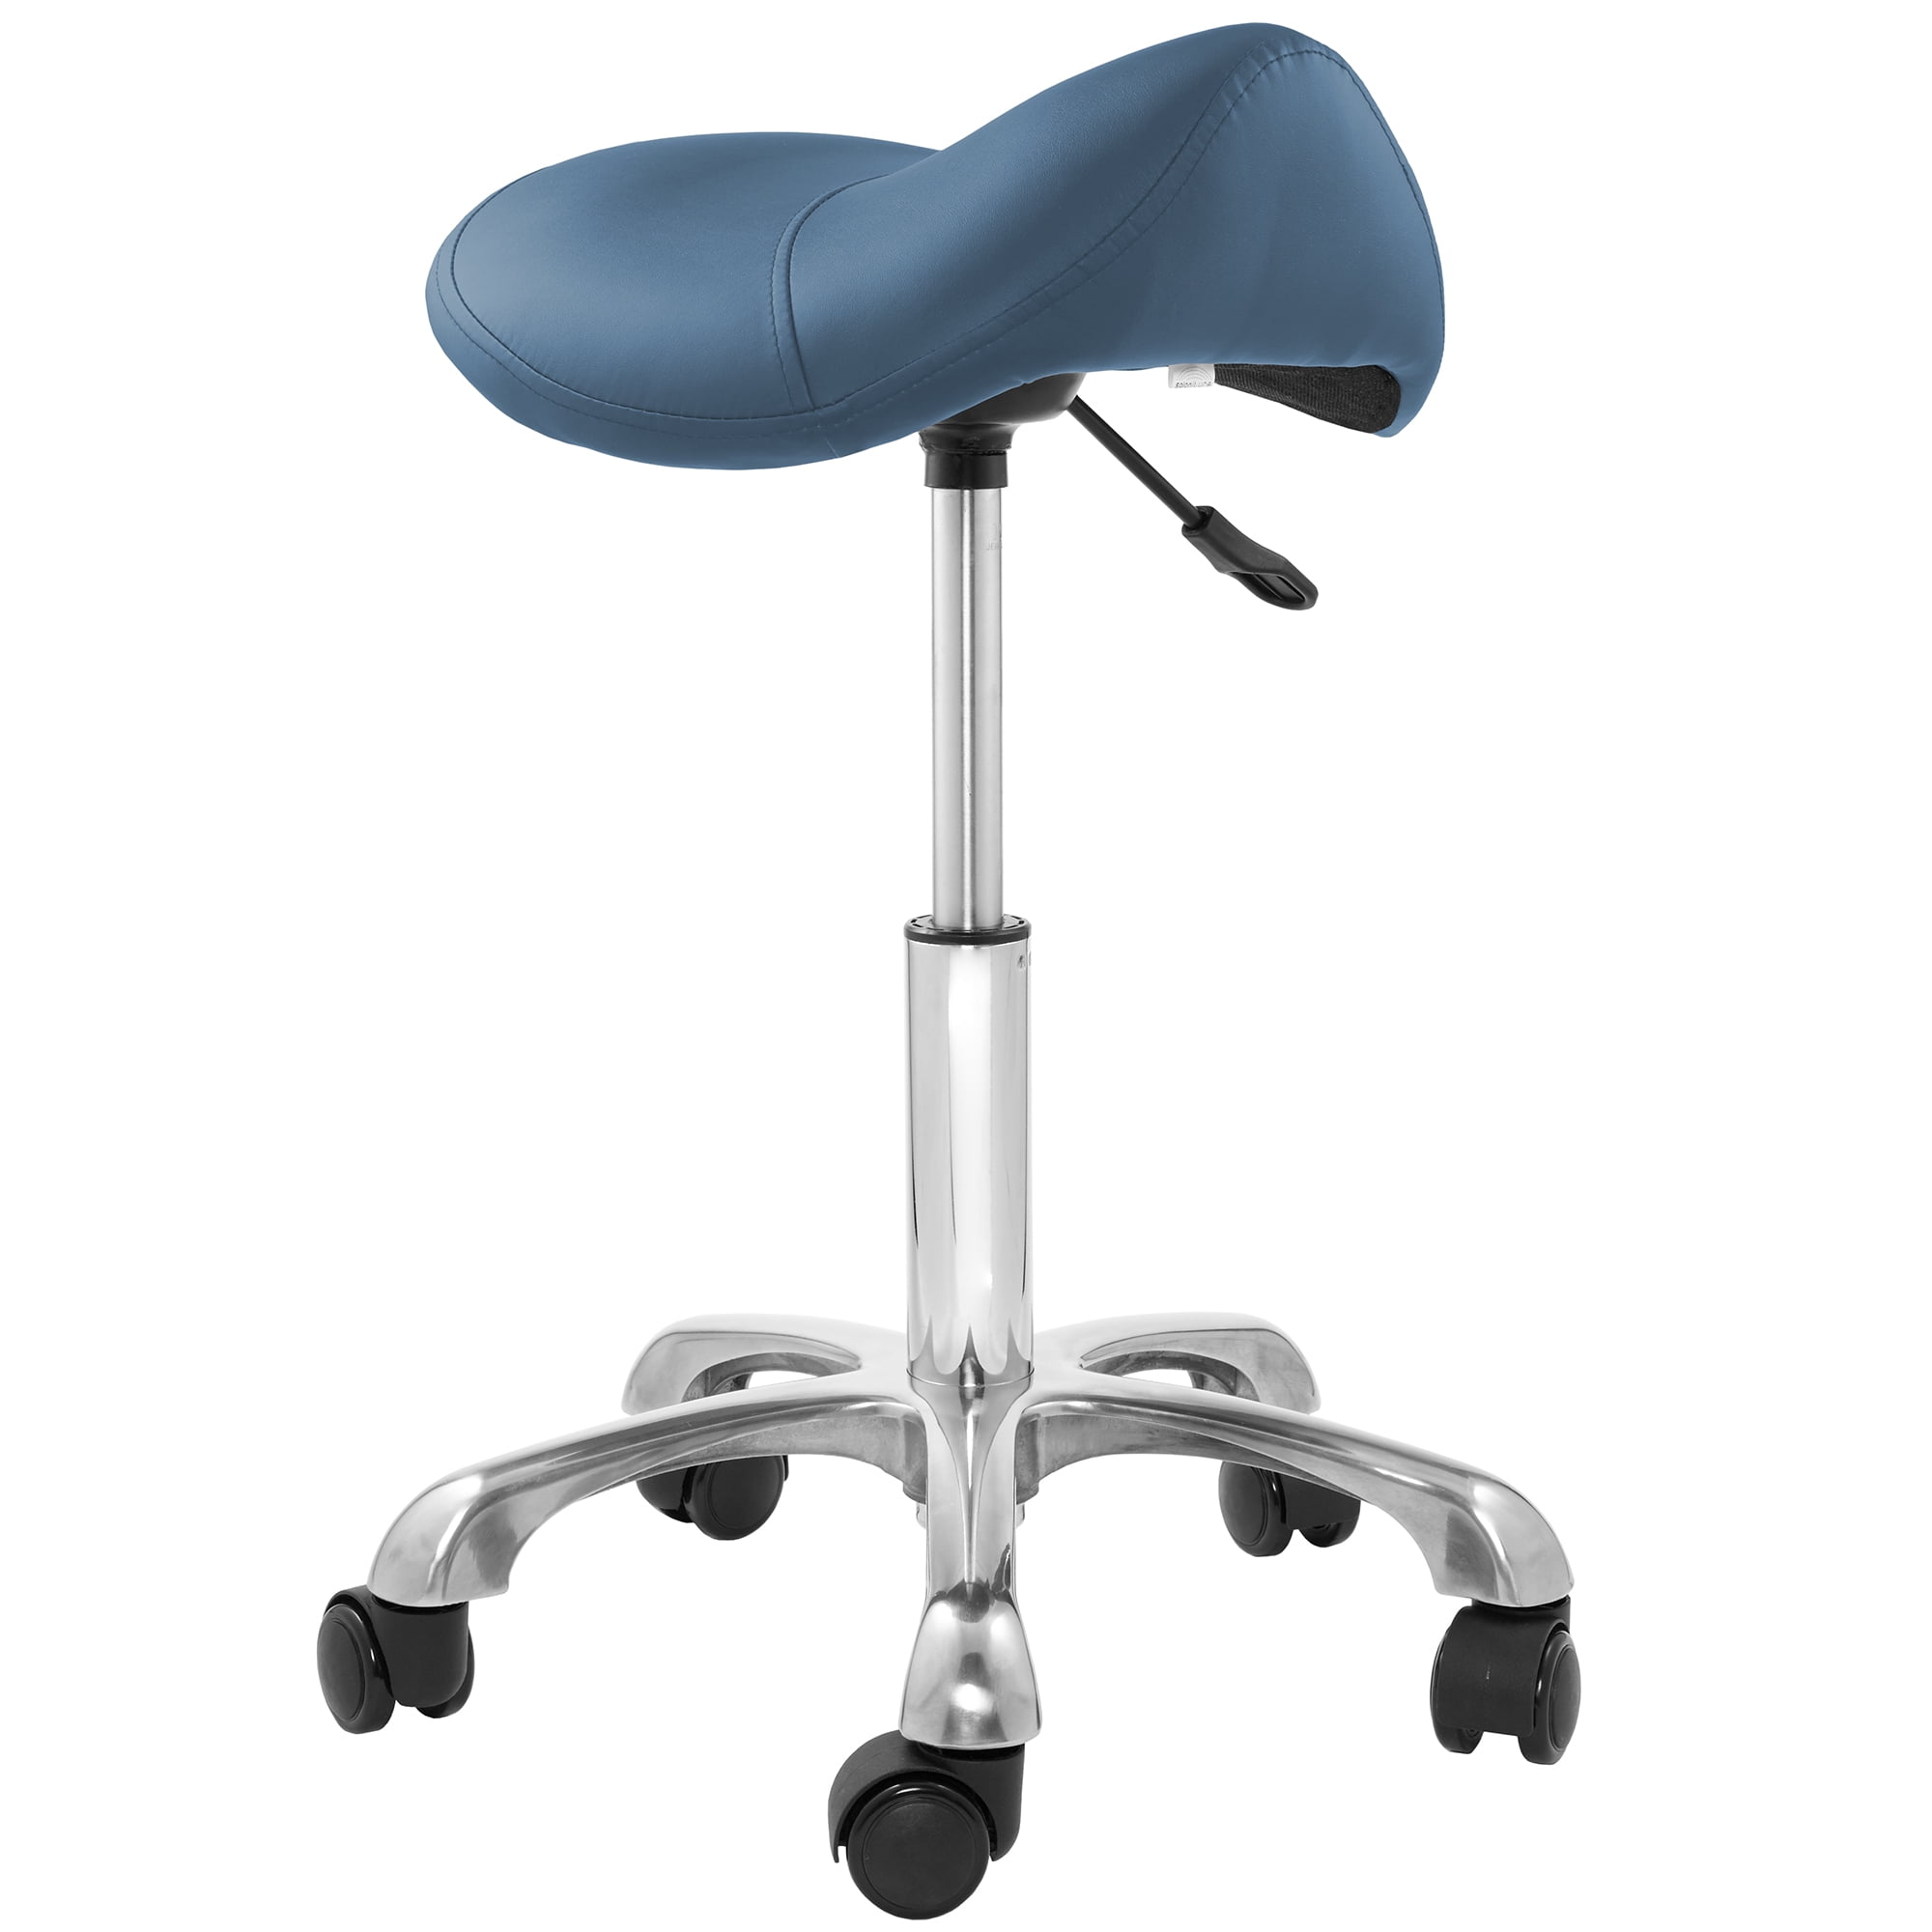 Saddle Stool Rolling Ergonomic Swivel Chair Polyurethane Stool Adjustable Height Hydraulic Chair with Wheels for Office Home Salon